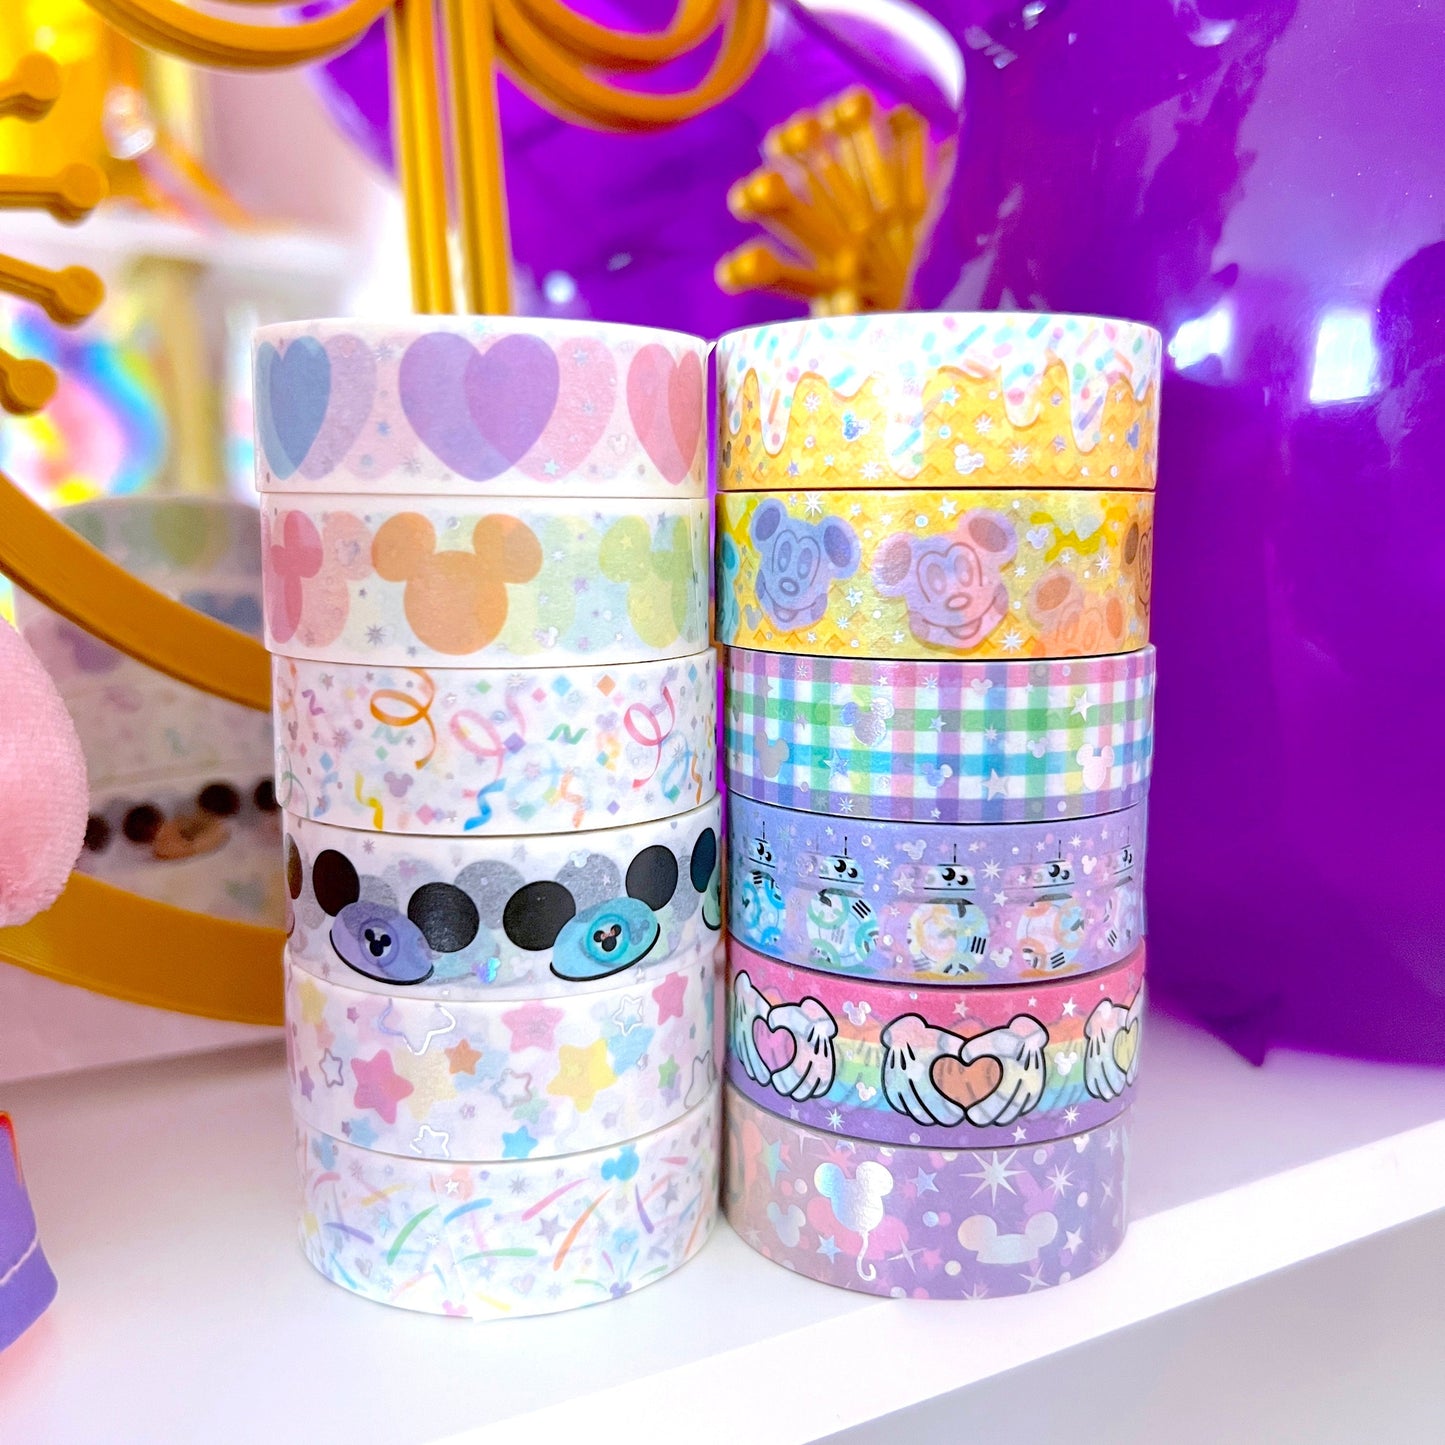 15MM Foiled Washi Tape - Pastel Rainbow Heart Hands